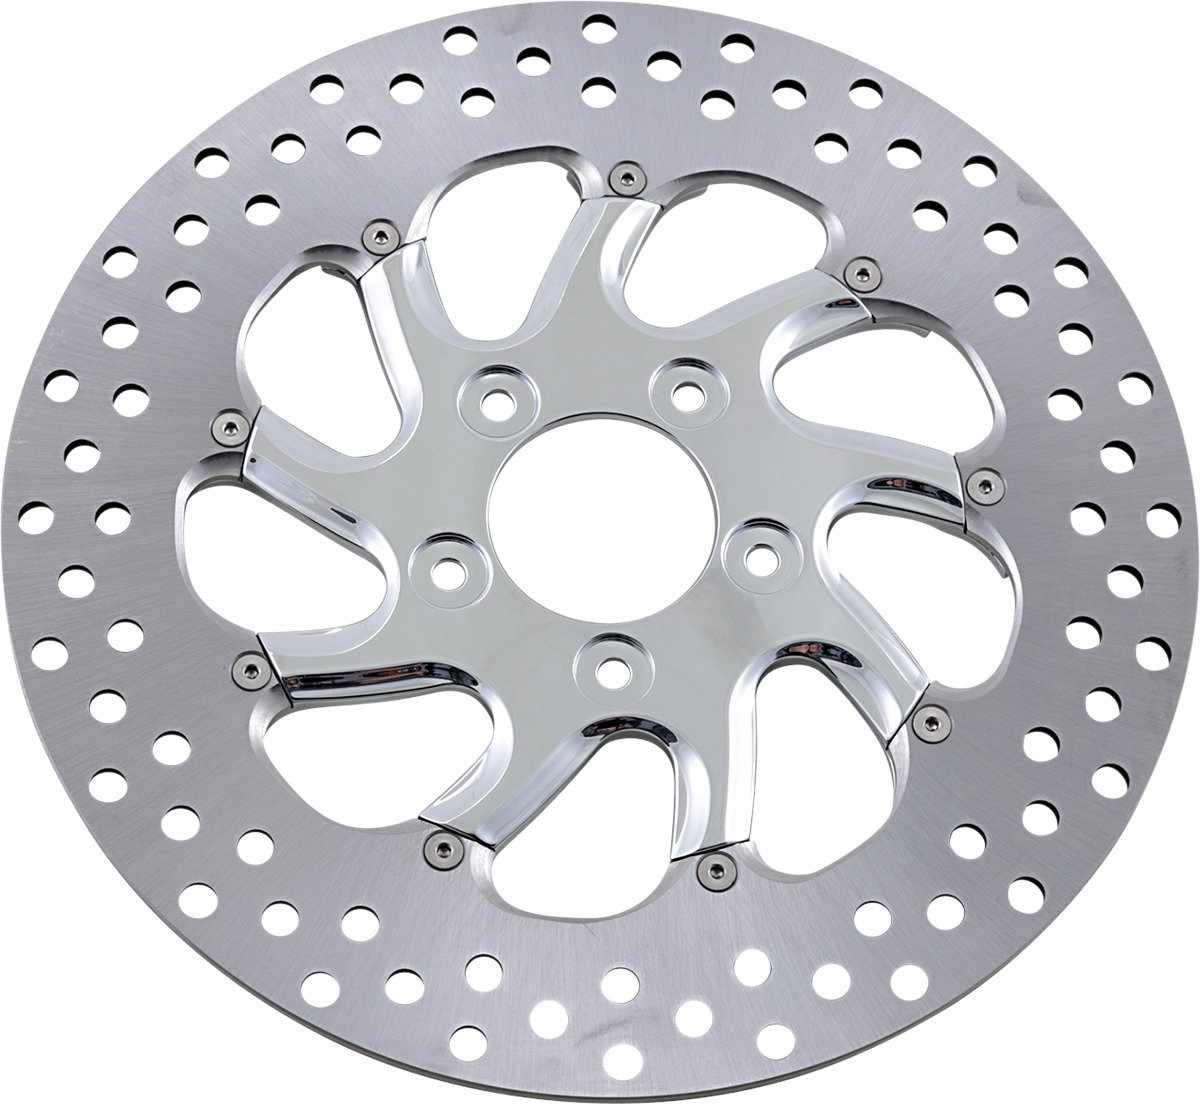 Torque Floating Front Left Brake Rotor 300mm Chrome - Harley - Click Image to Close